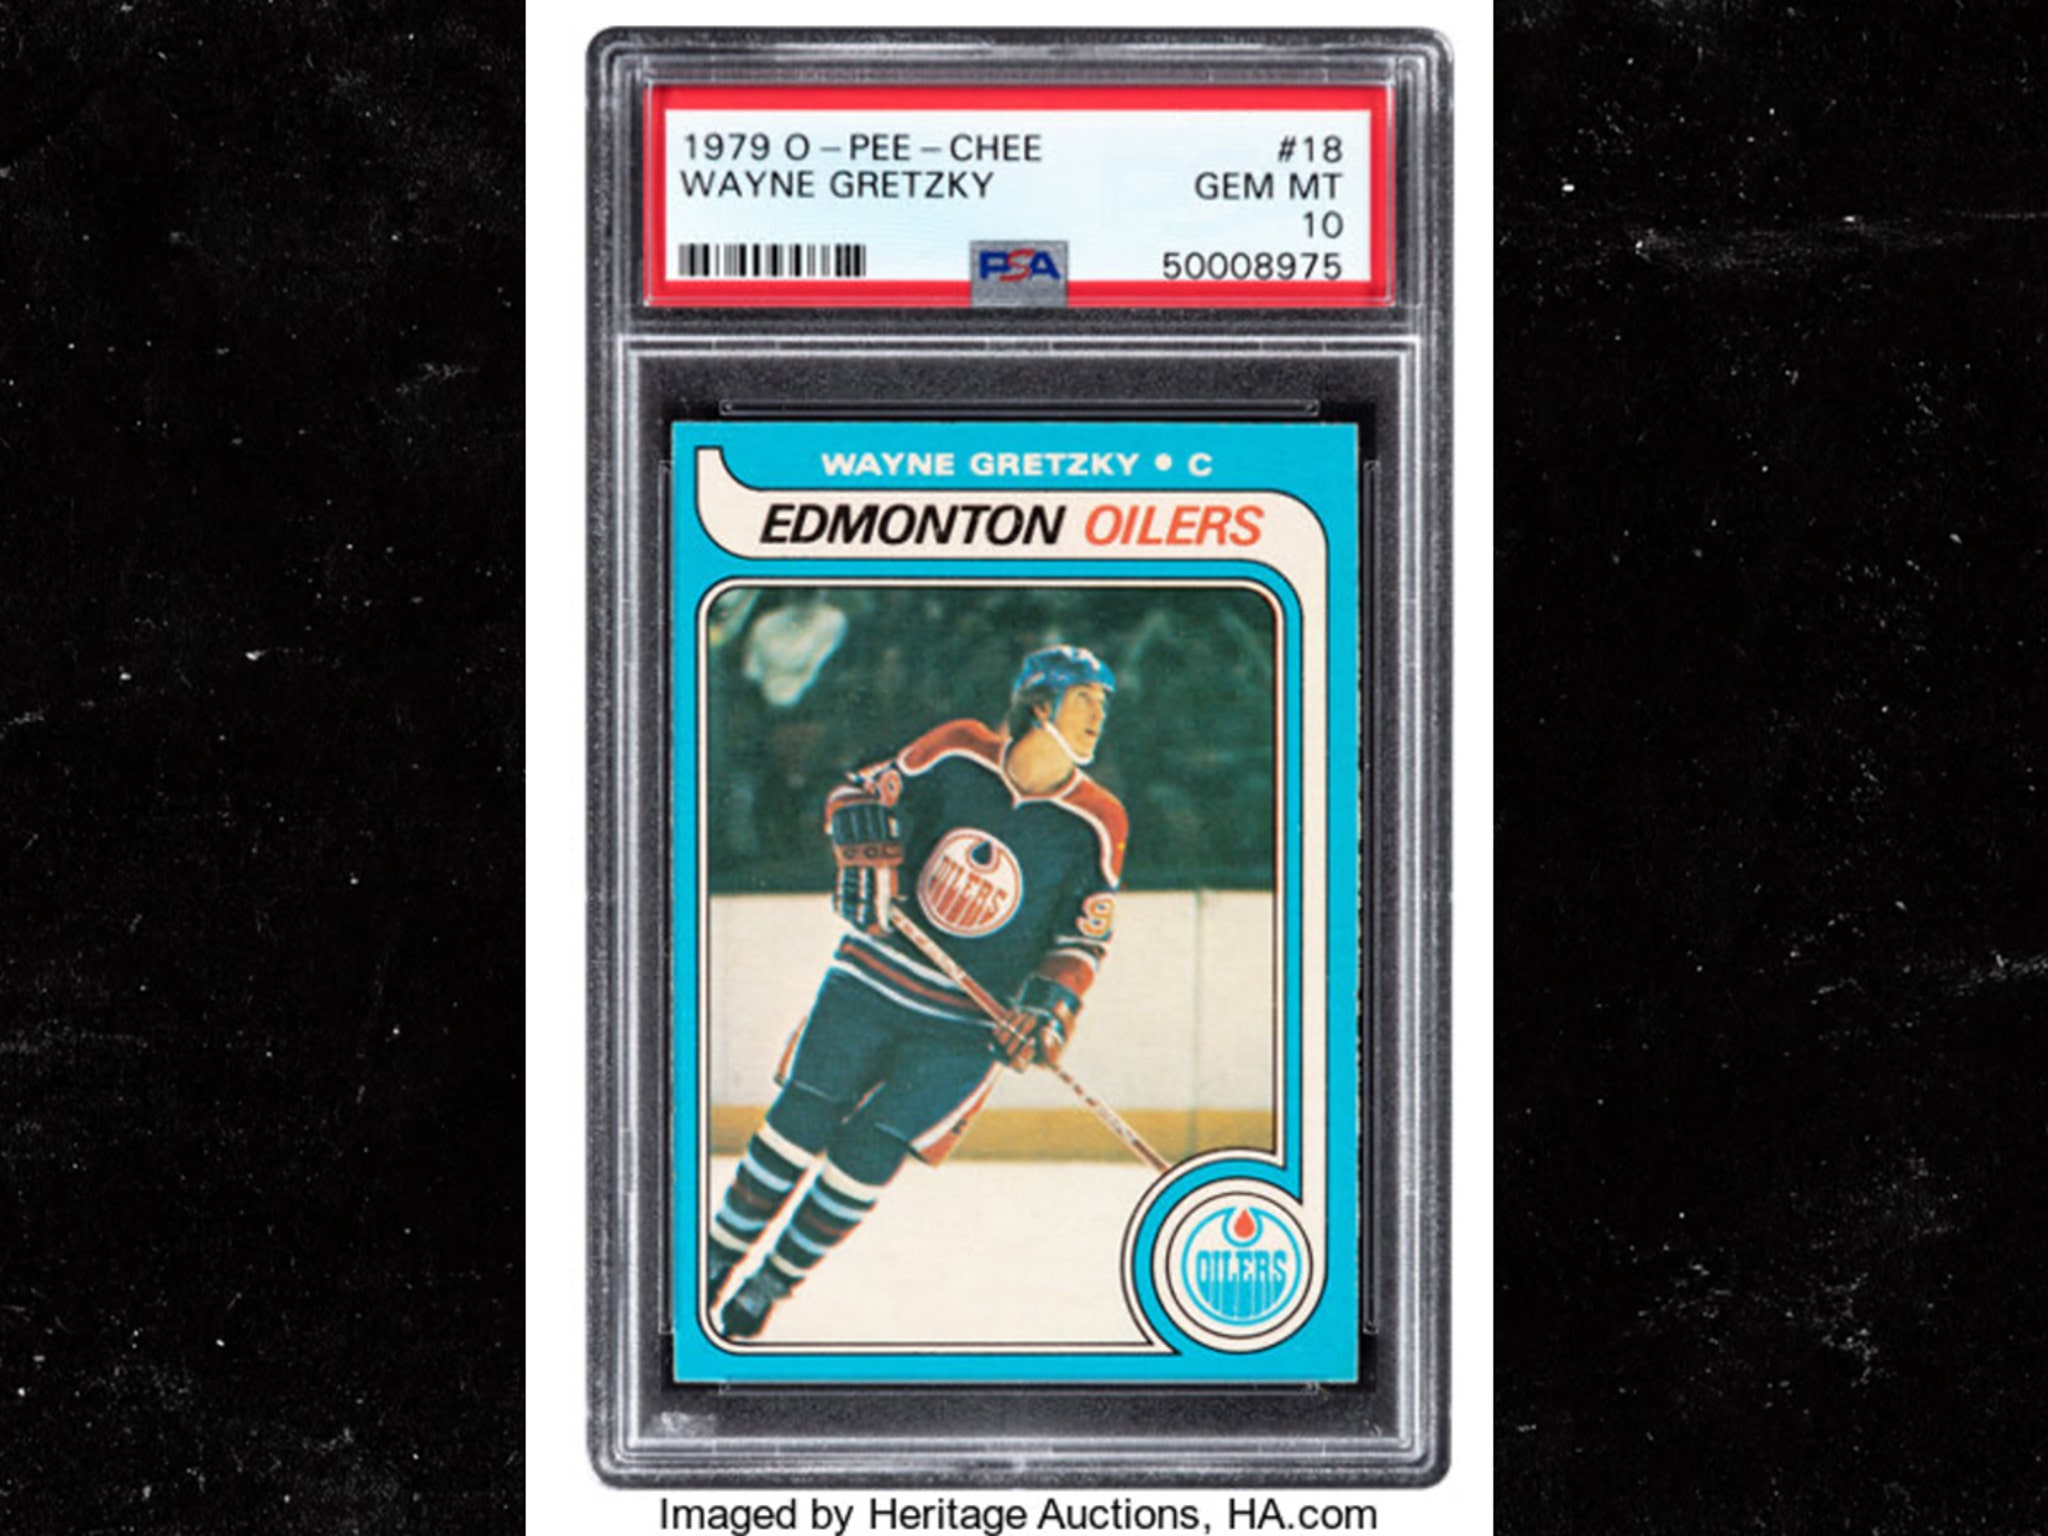 Wayne Gretzky Rookie Card Fetches 1 3 Mil At Auction Most Ever For A Hockey Card